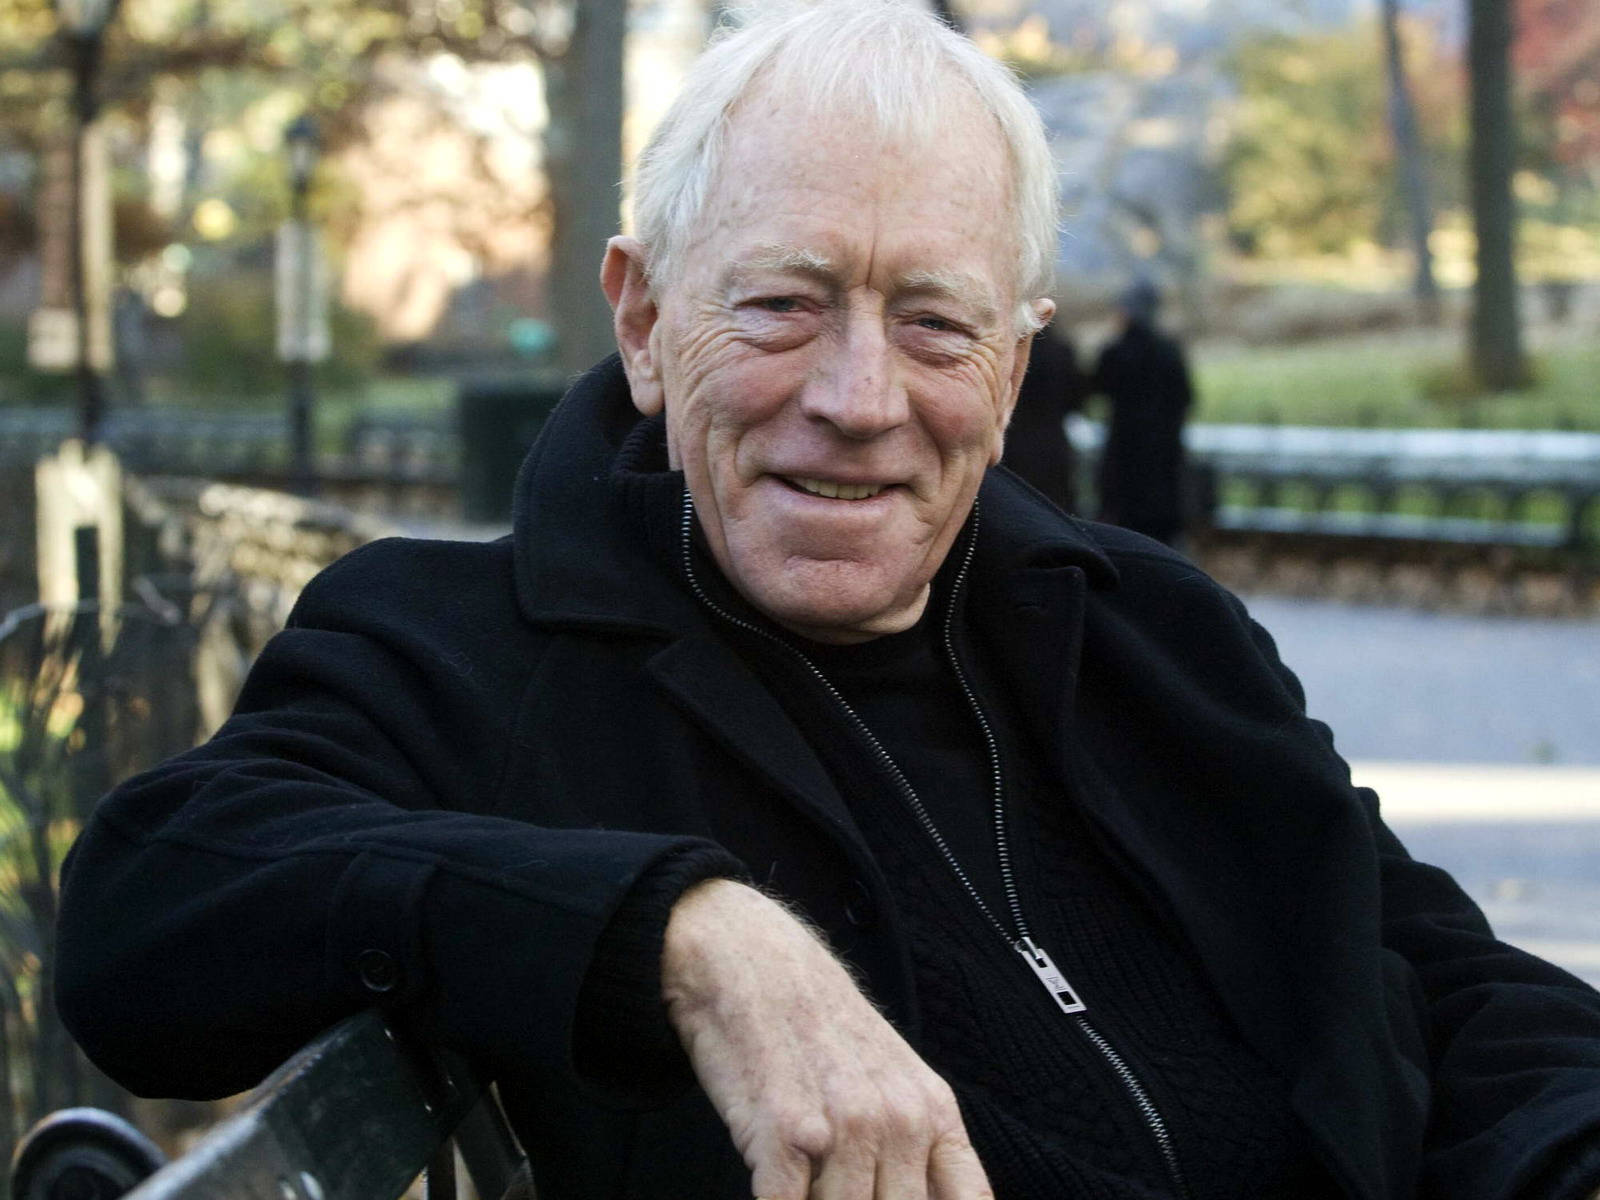 Max Von Sydow At The Park Wallpaper